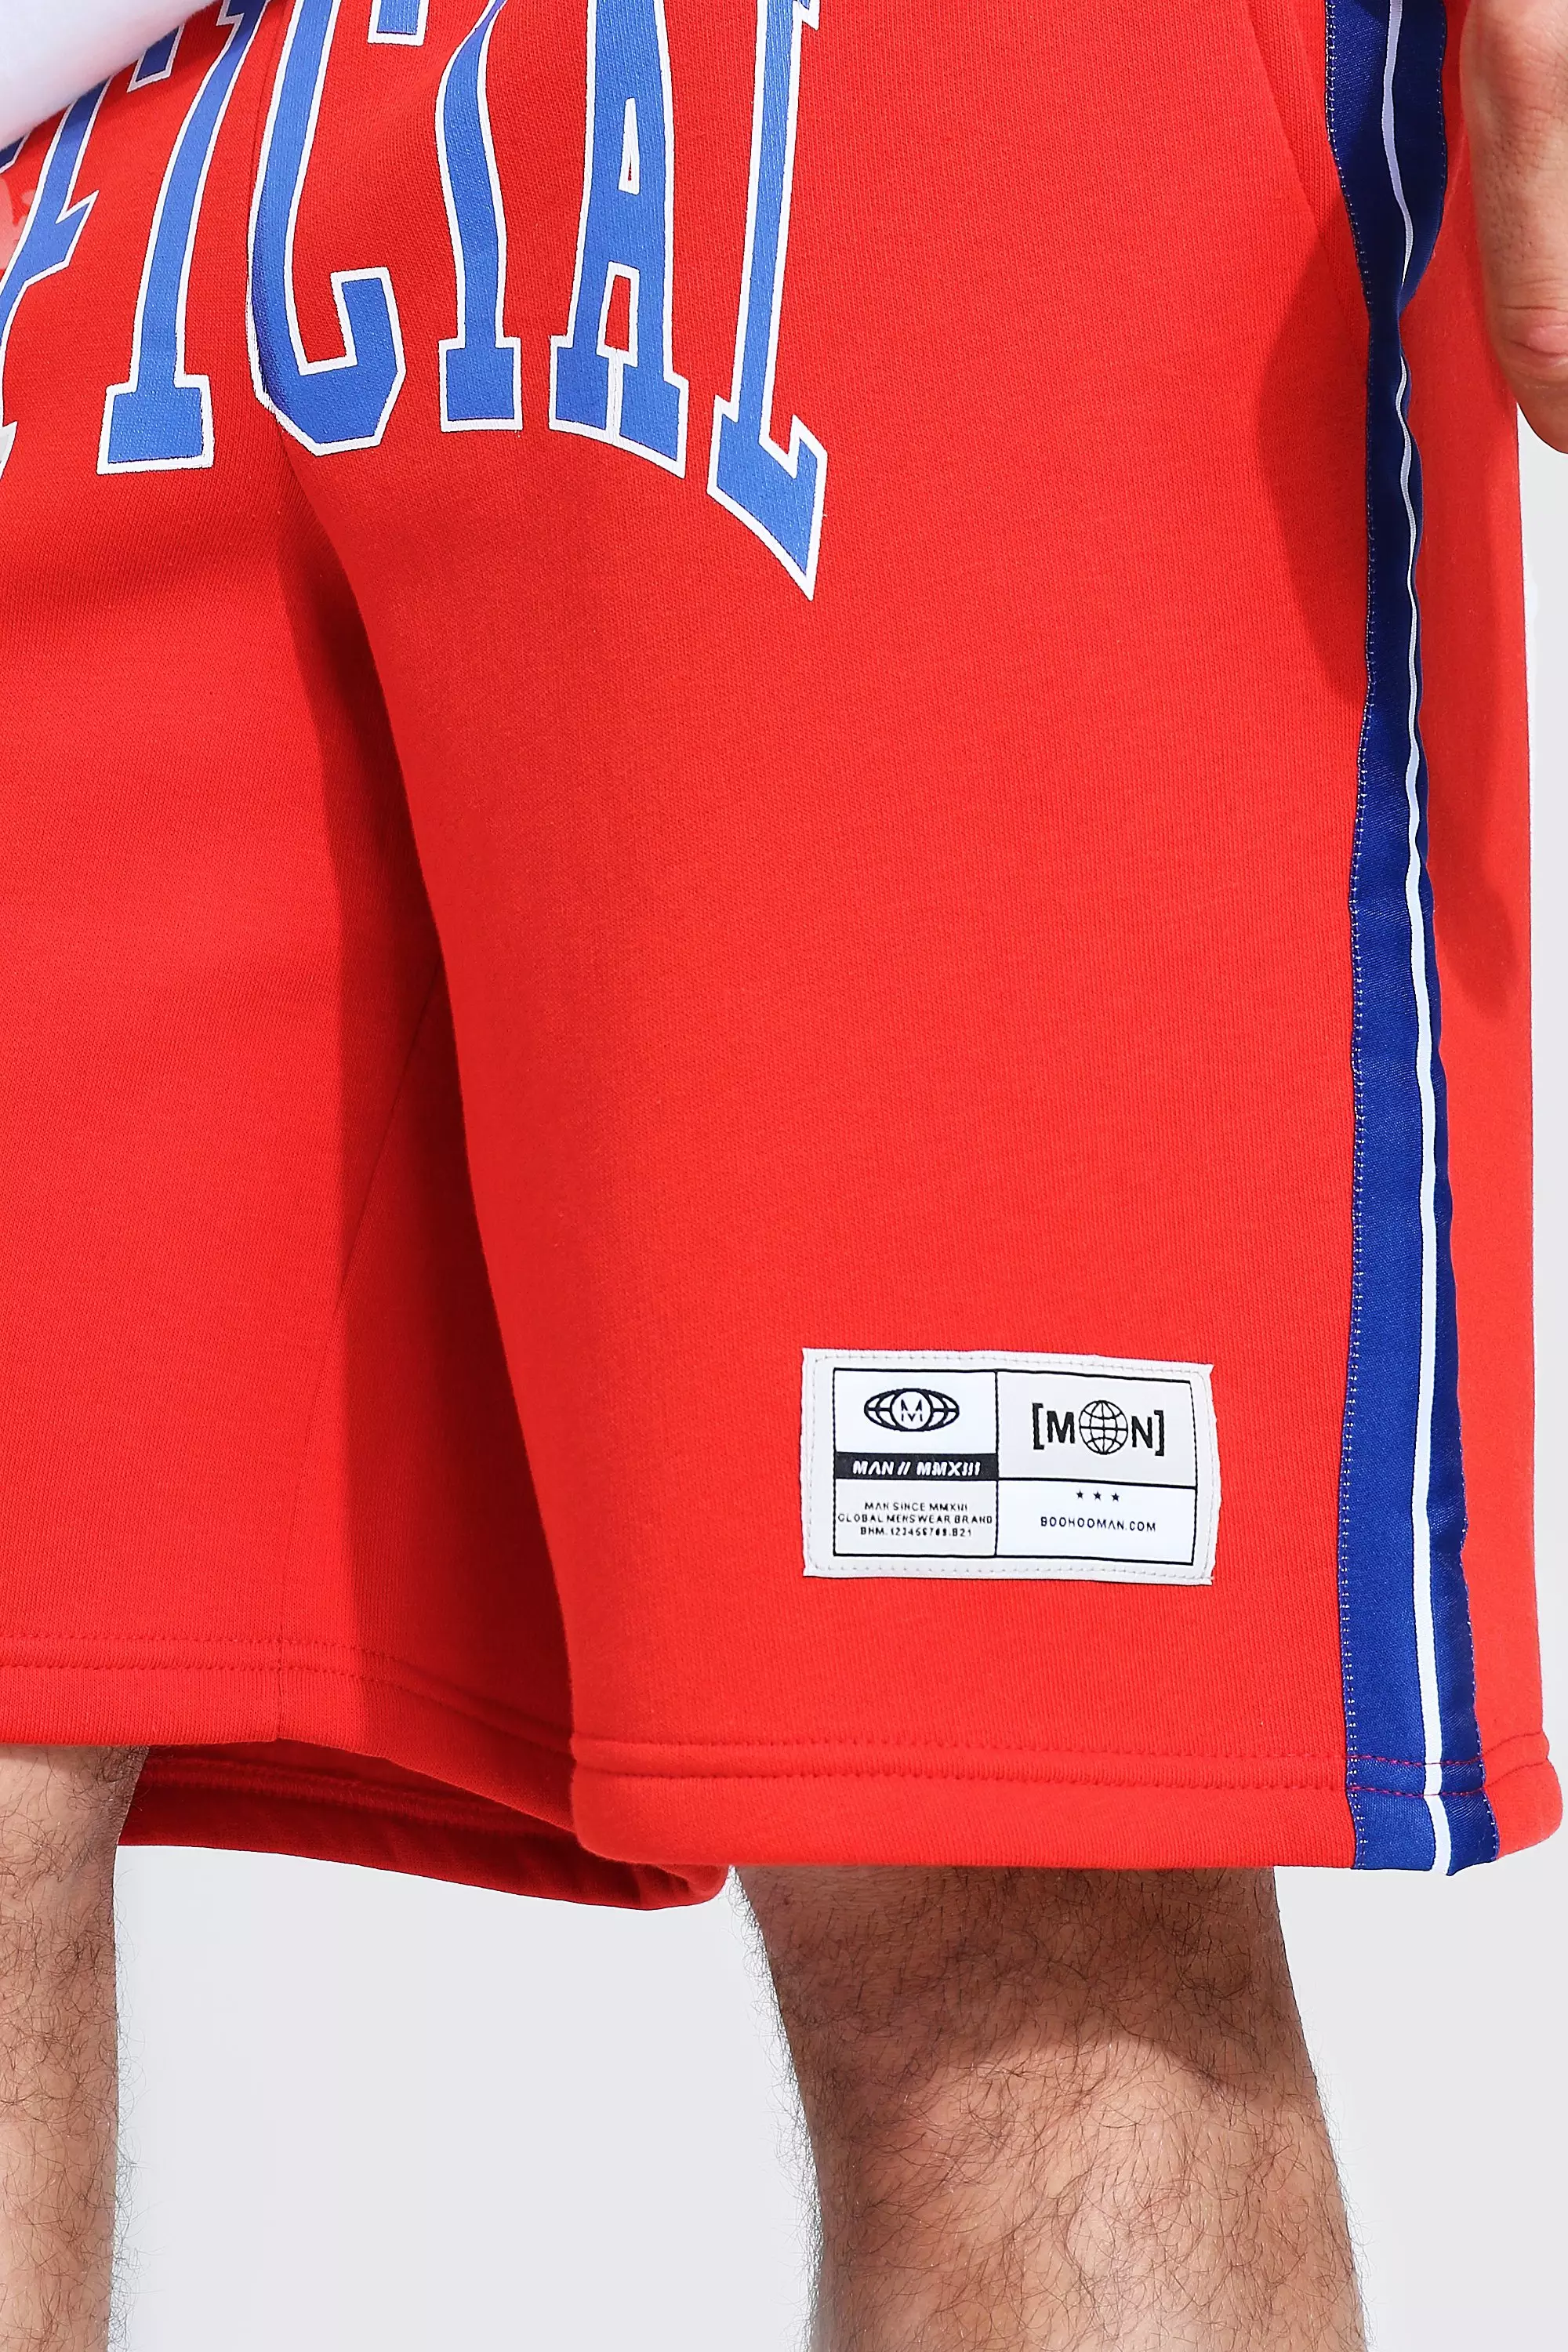 Offcl Basketball Jersey Shorts With Tape